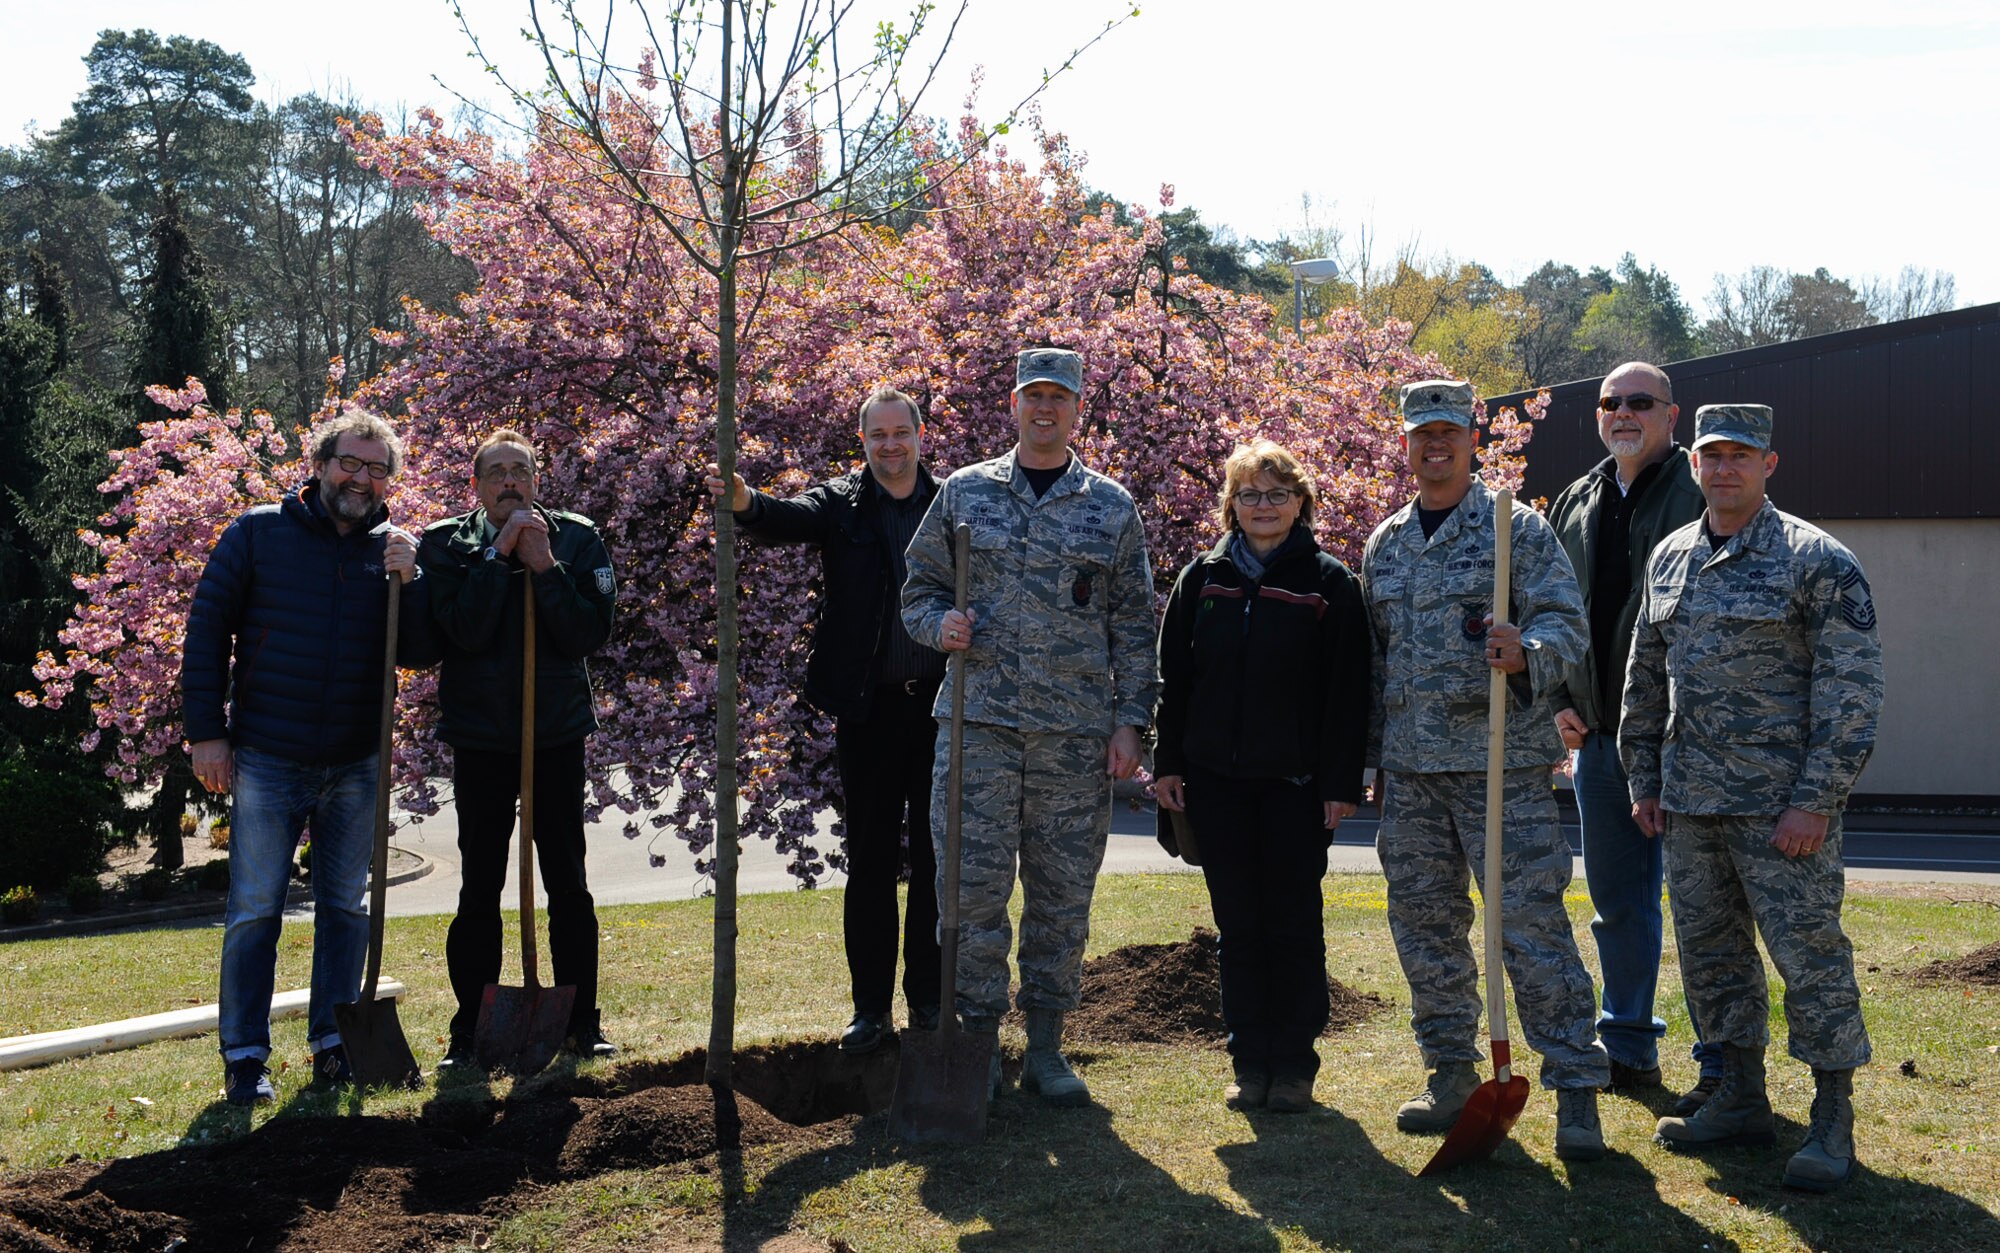 The 86th Civil Engineer Group leadership and federal forest departments participate in a tree planting ceremony on Ramstein Air Base, Germany, April 21, 2017. The tree planting ceremony was held to celebrate Earth Day and raise awareness for environmental protection. (U.S. Air Force photo by Airman 1st Class Savannah L. Waters)